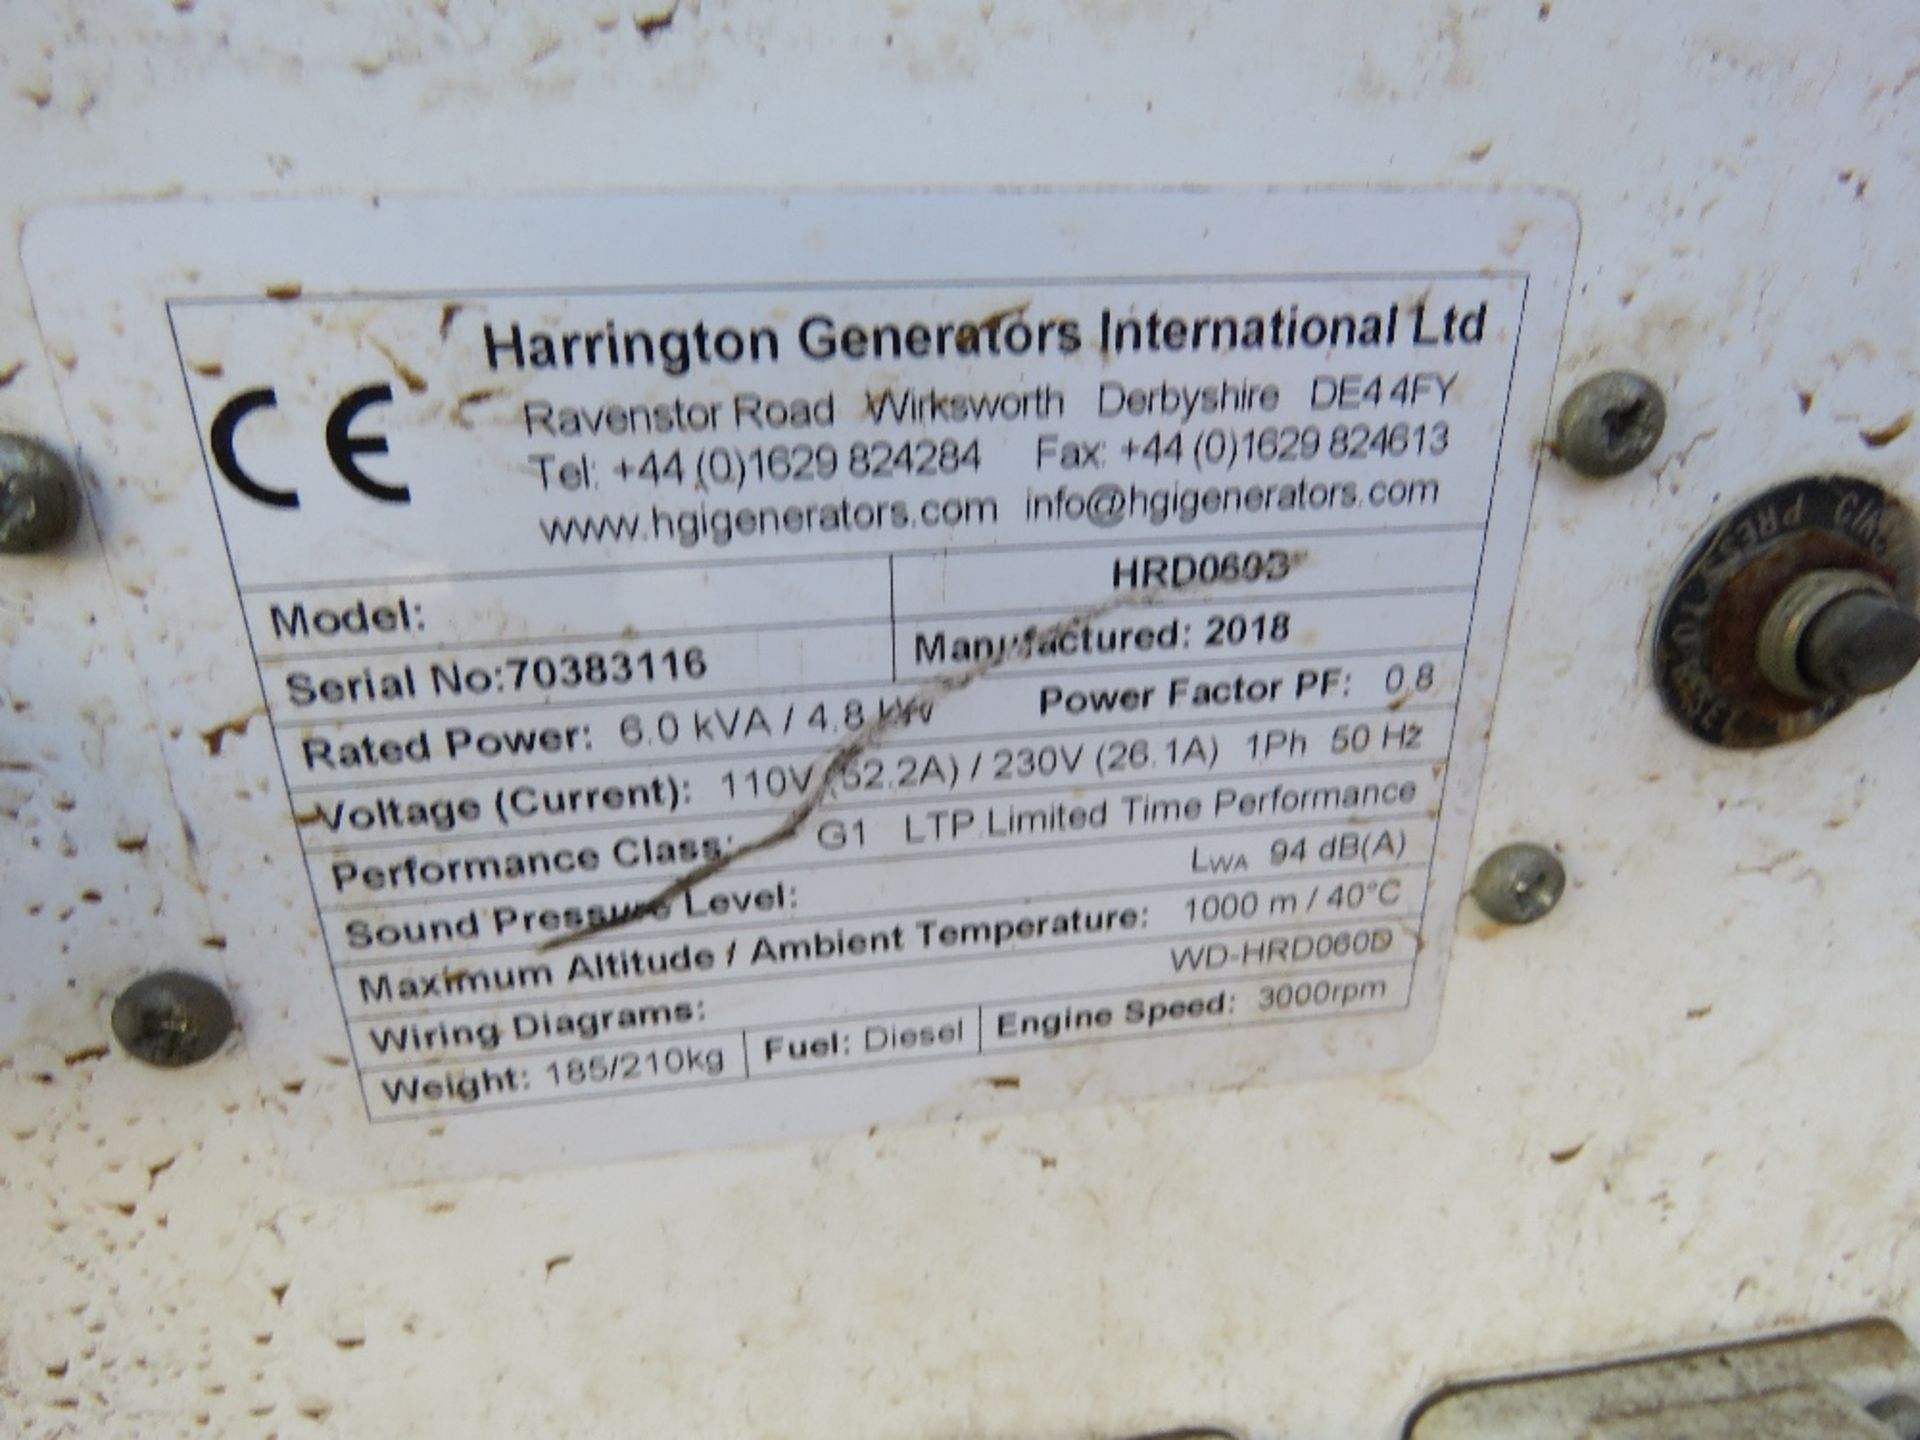 HGI BARROW GENERATOR 6KVA DUAL VOLTAGE OUTPUT, YEAR 2018. WHEN TESTED WAS SEEN TO RUN AND MAKE POWER - Image 3 of 5